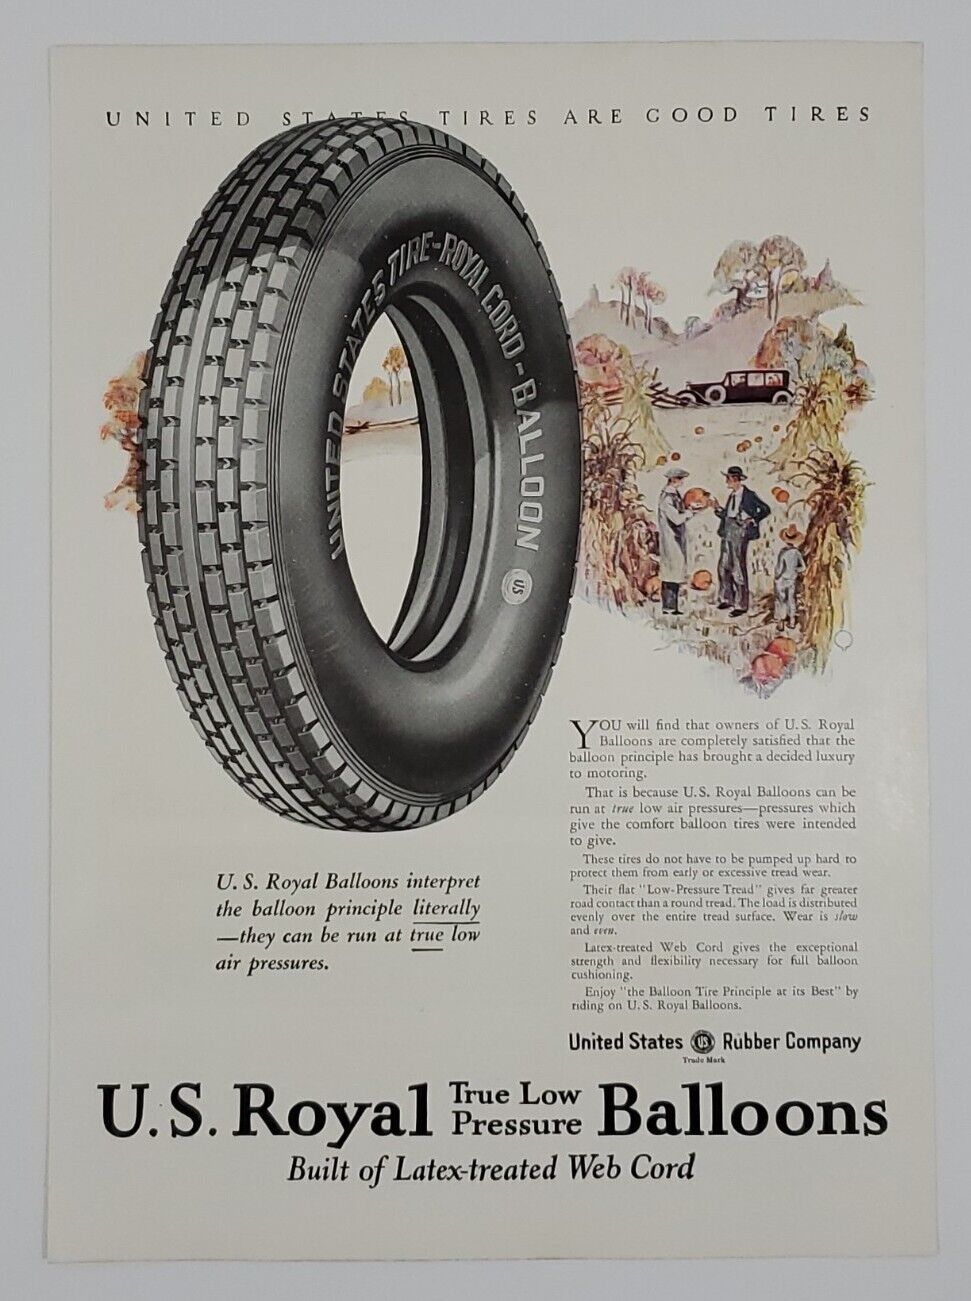 Vintage 1925 Print Ad - U.S. TIRE CO. ROYAL CORD - BALLOONS - Low Pressure Tires